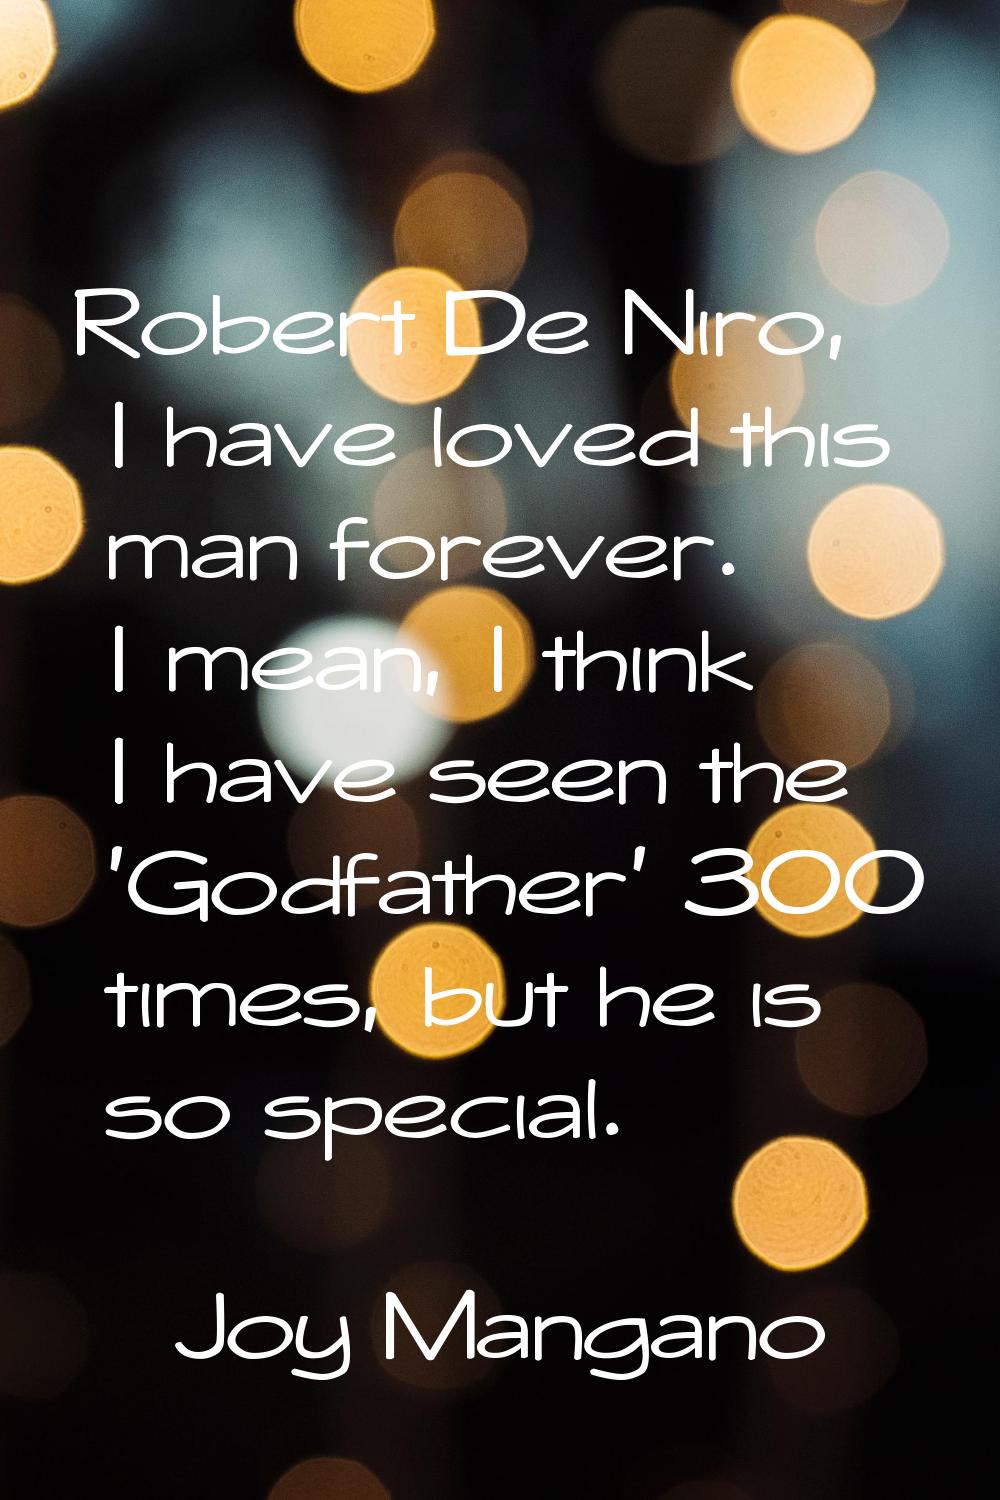 Robert De Niro, I have loved this man forever. I mean, I think I have seen the 'Godfather' 300 time